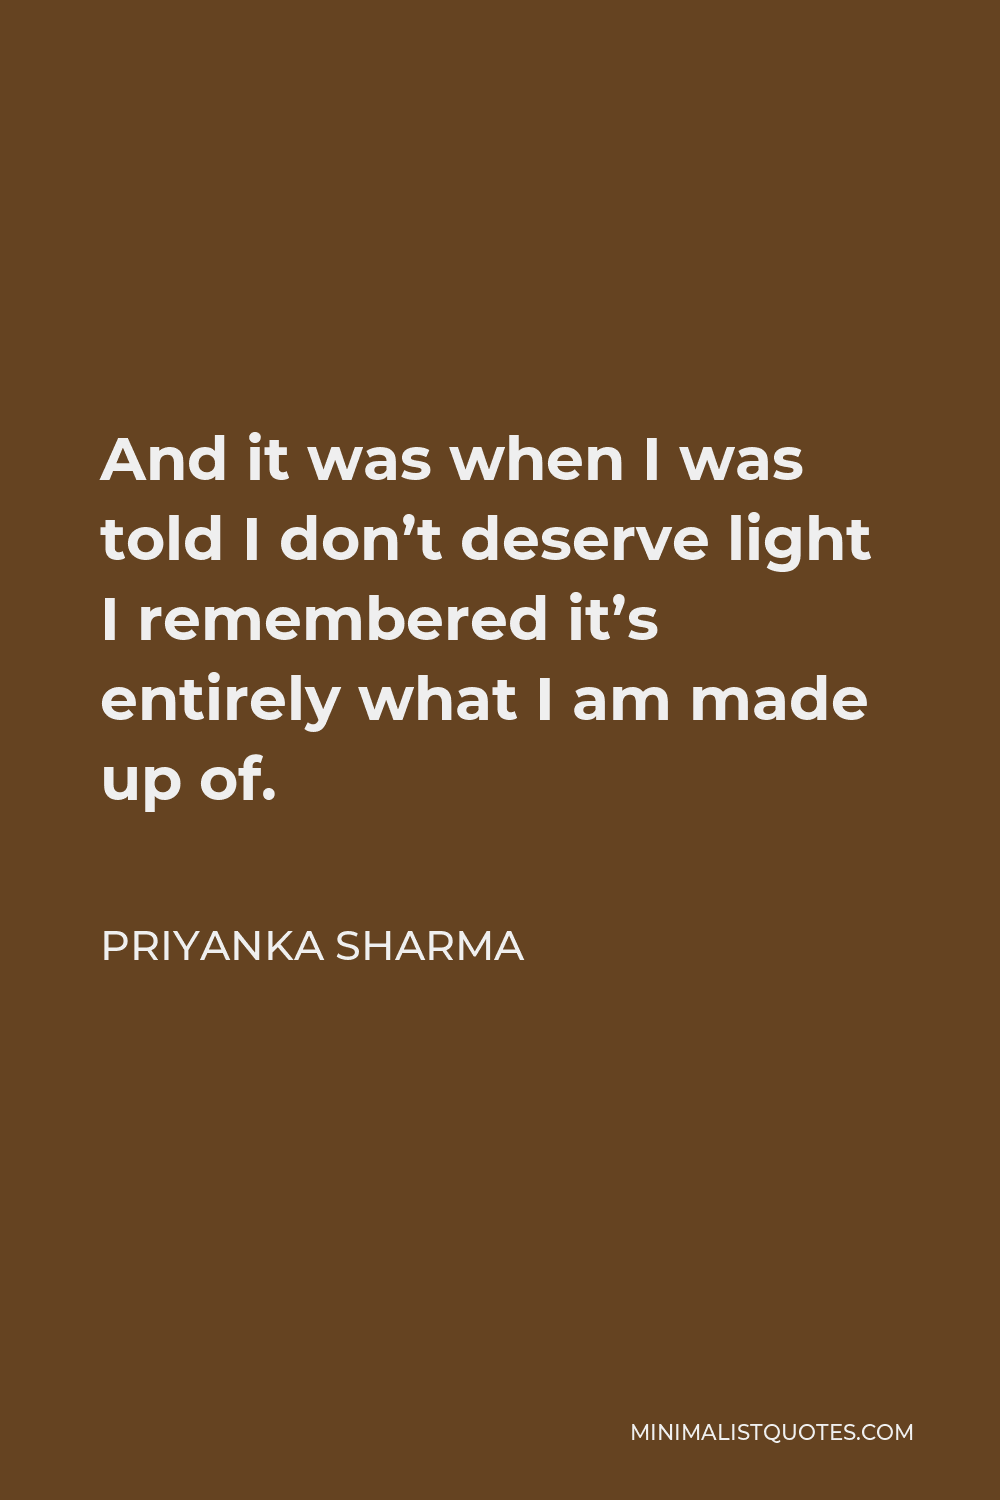 Priyanka Sharma Quote - And it was when I was told I don’t deserve light I remembered it’s entirely what I am made up of.